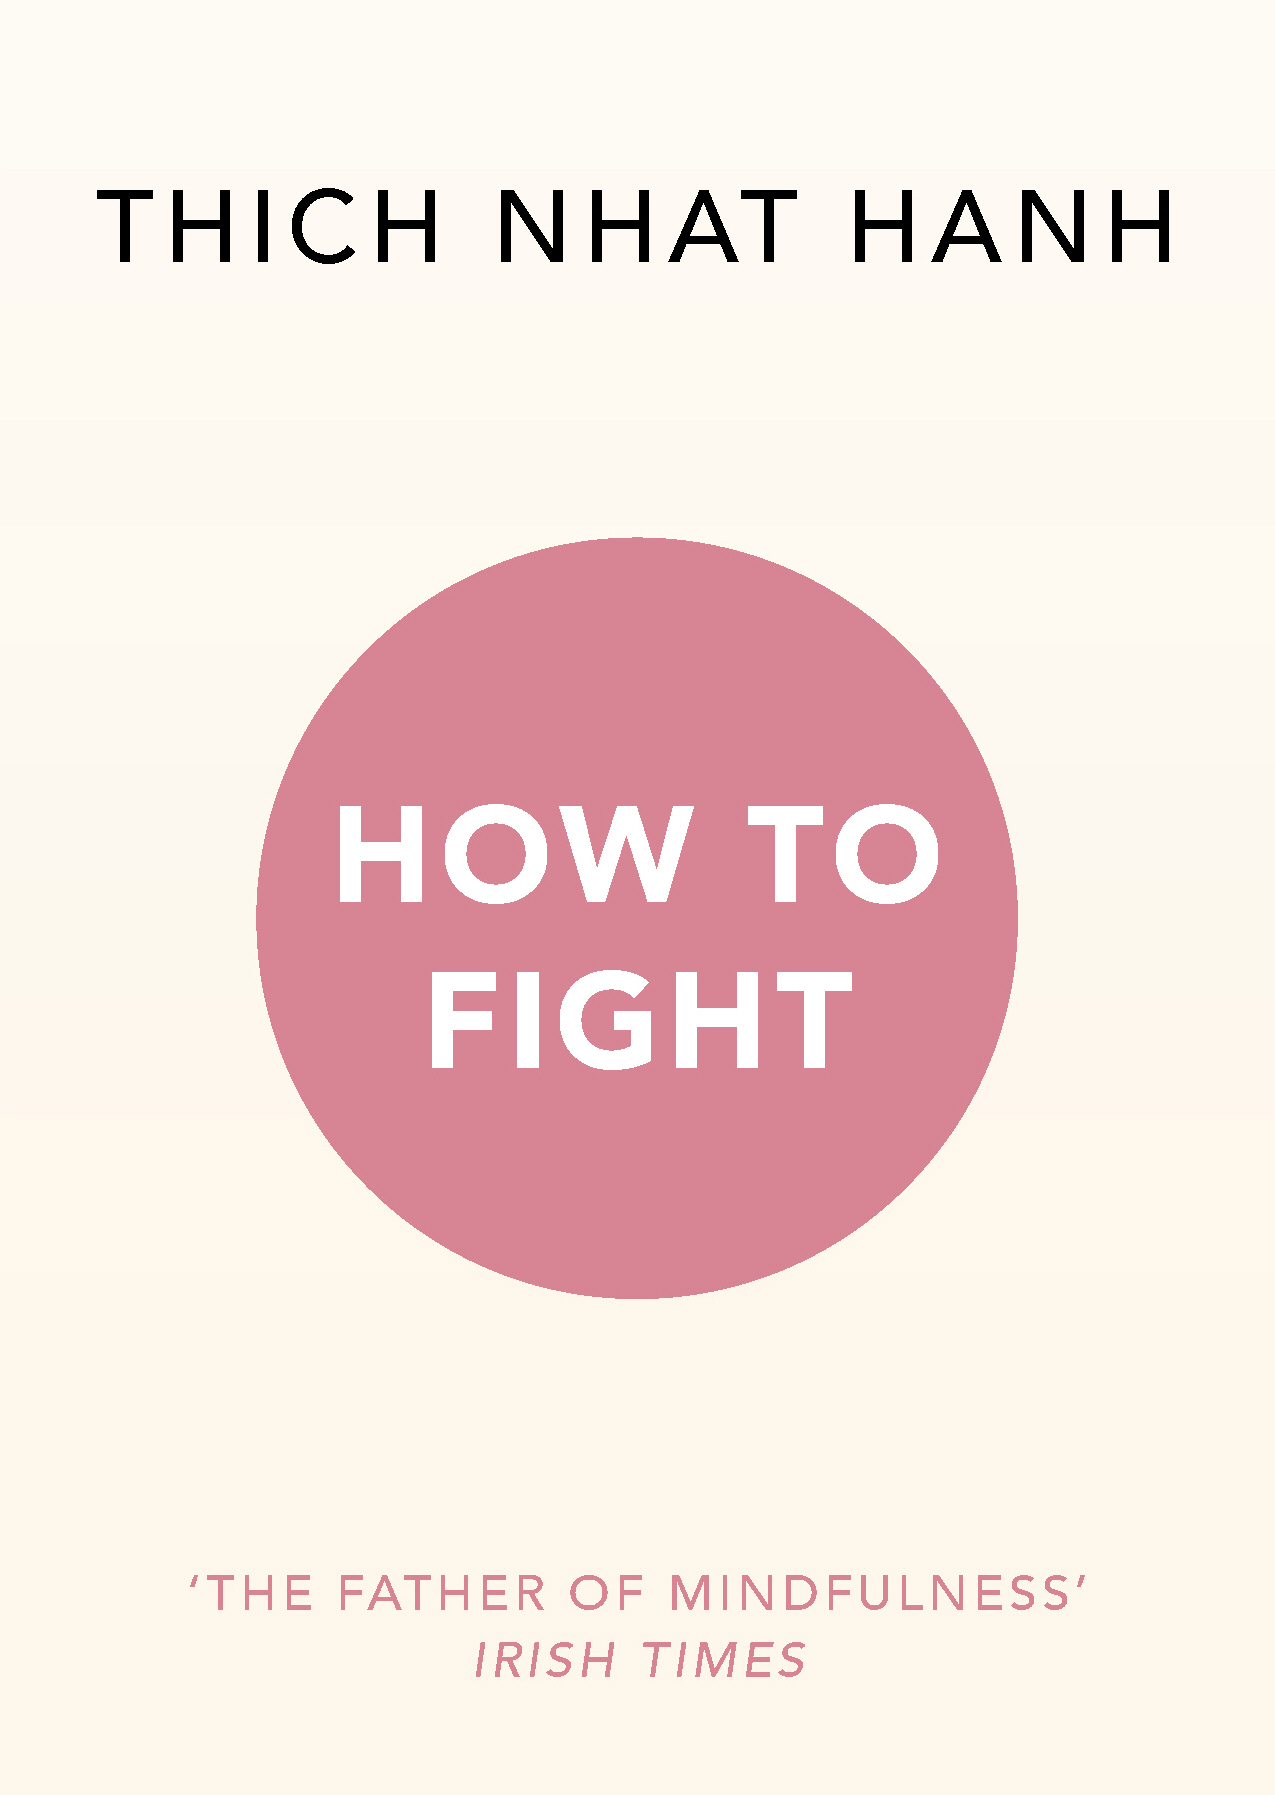 How To Fight Thich Nhat Hanh Pdf